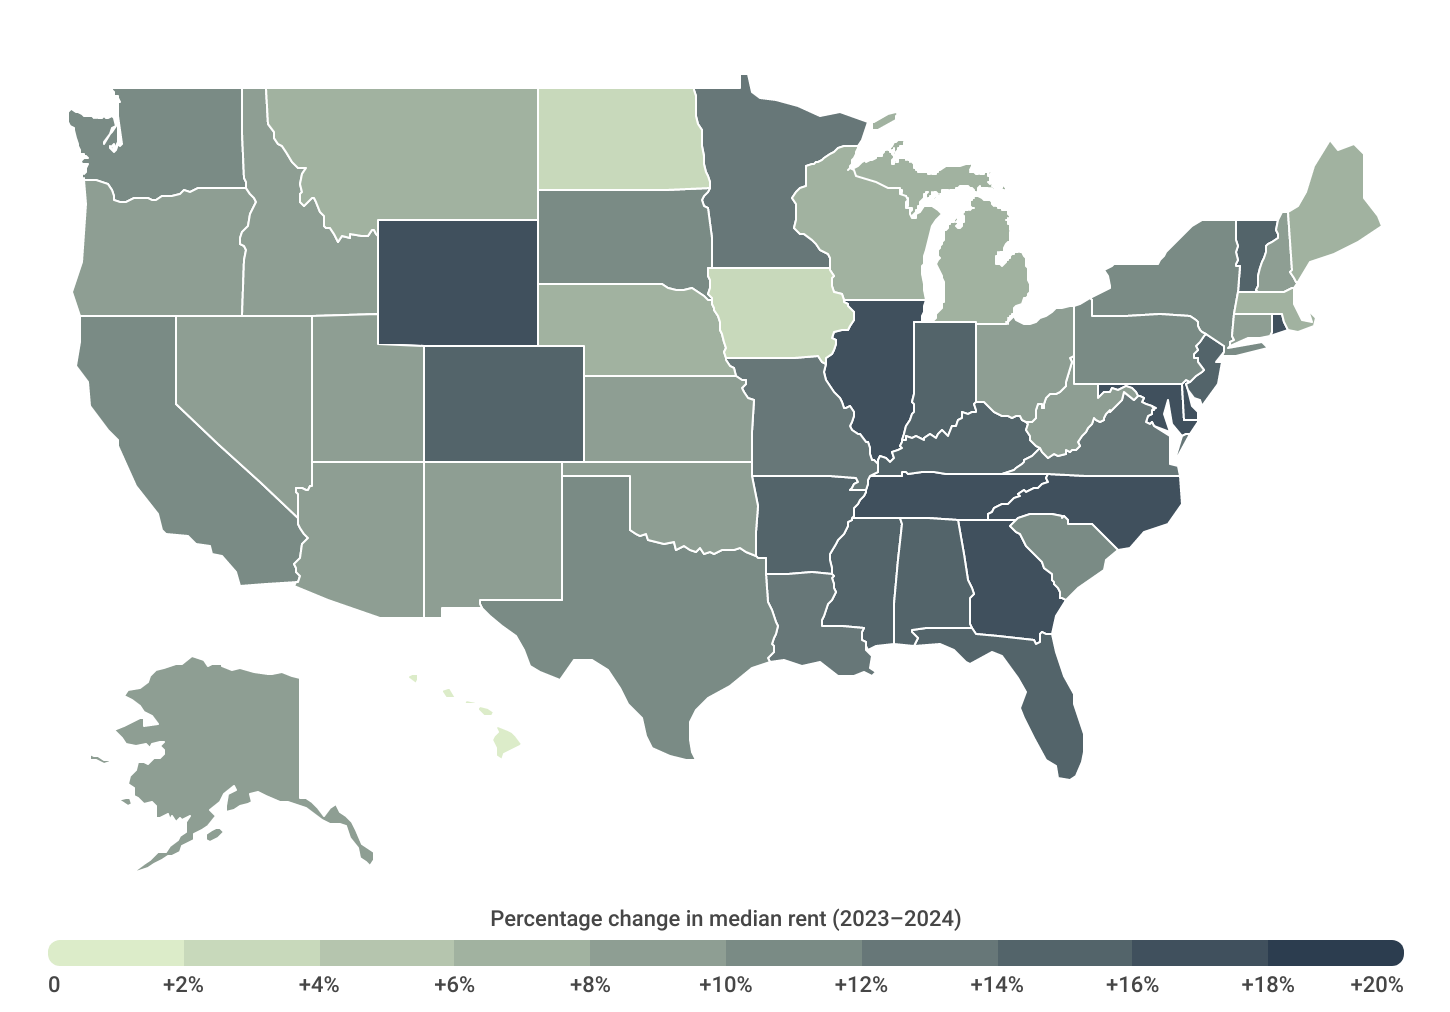 The majority of states saw double-digit rent increases over the past year